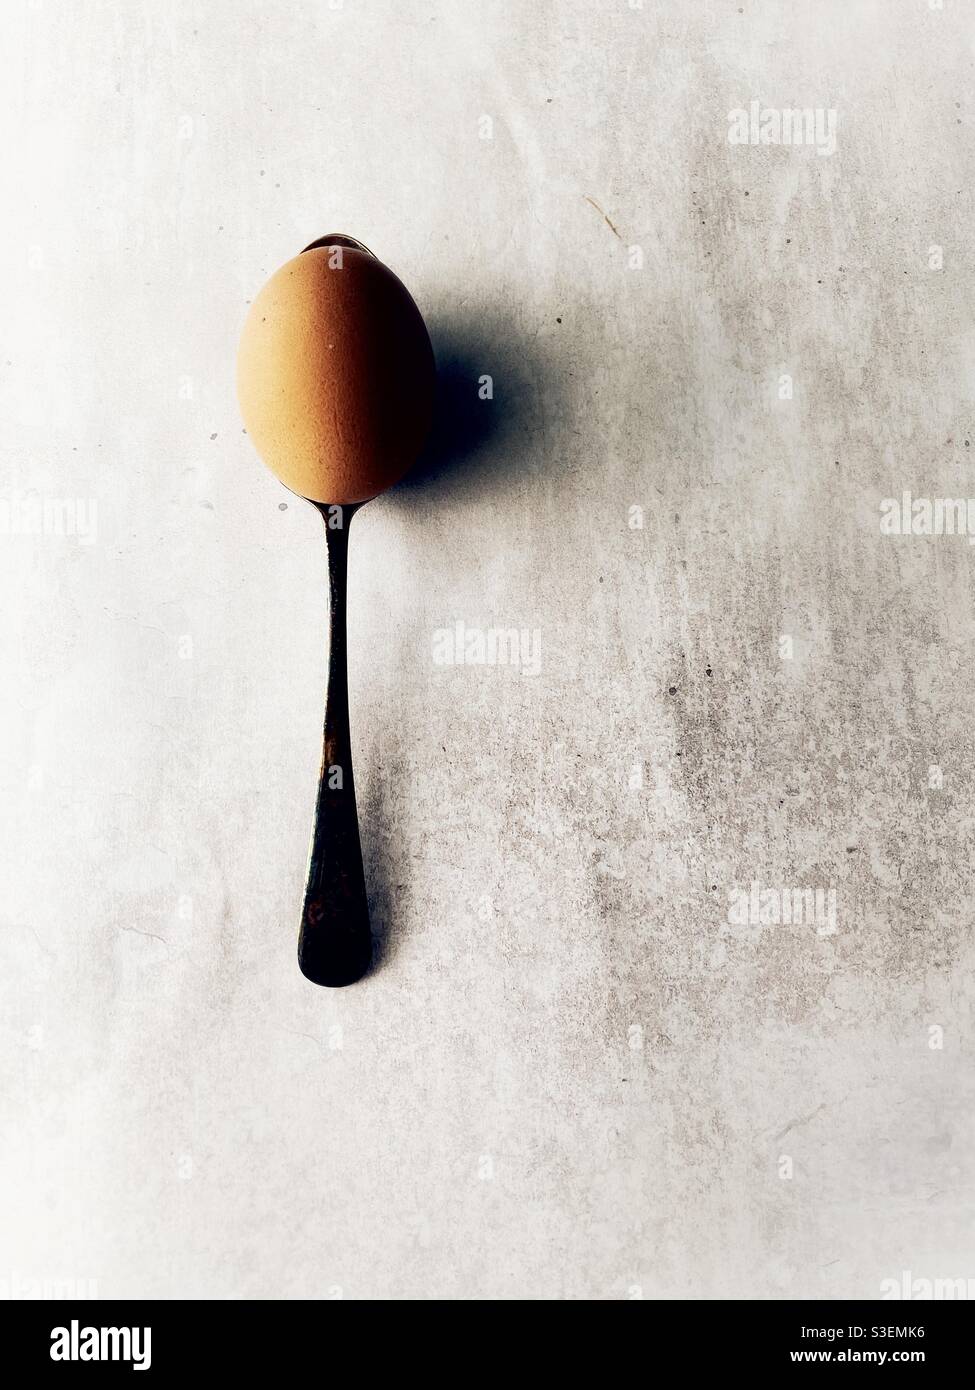 Egg and Spoon Stock Photo